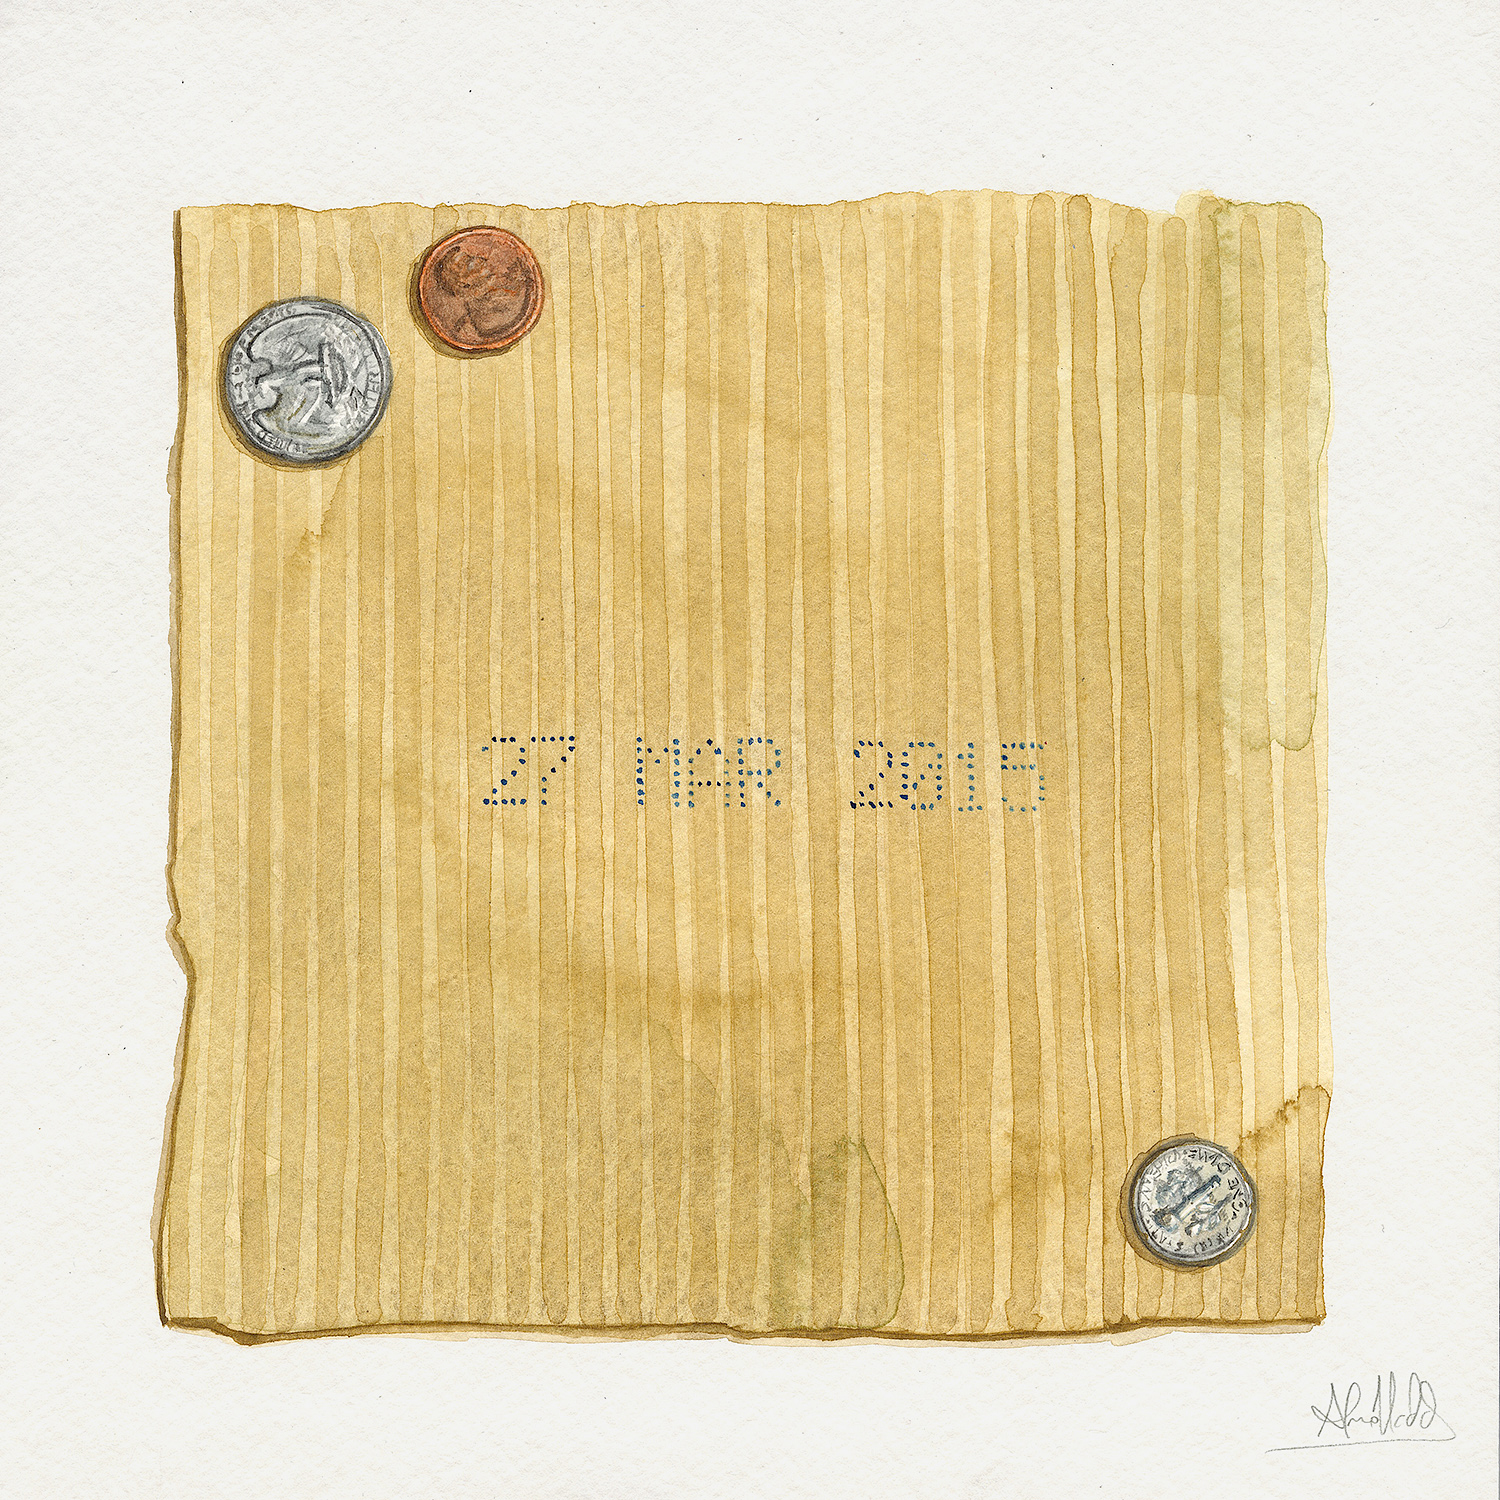 Alvaro Naddeo, Thirty-Six Cents, 2015. Watercolor on paper, 9 x 9 in.